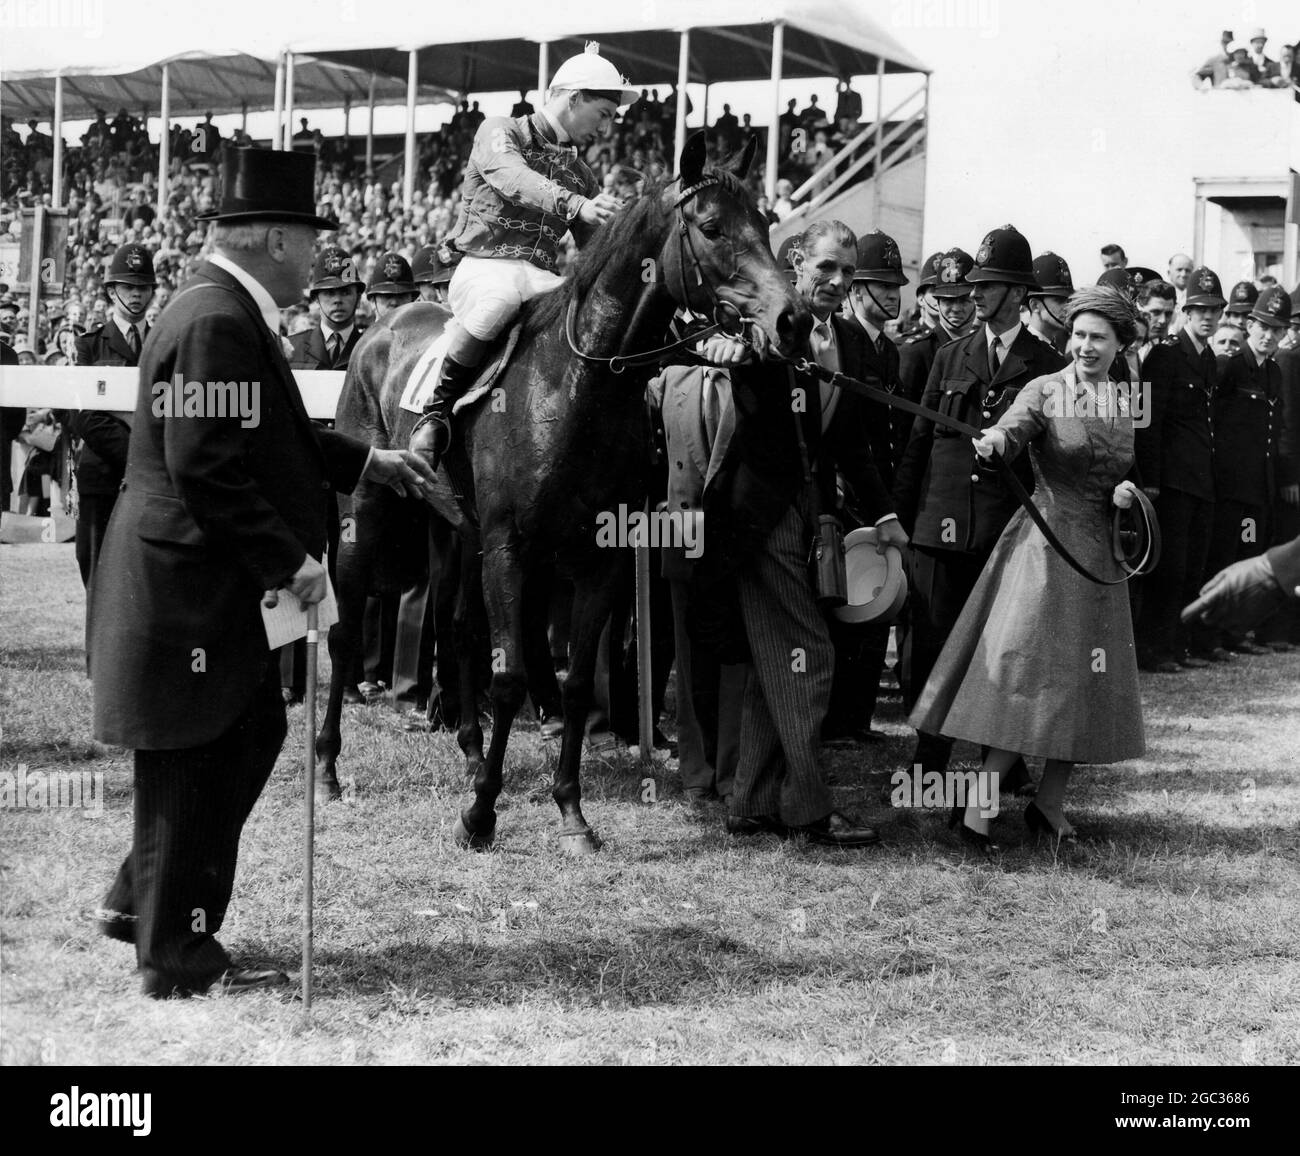 HM Queen Elizabeth II leads her horse Carrozza in after it has won the 179th Oaks Stakes, with Lester Piggott in the saddle. On the left is Lord Rosebery, a course steward, and in the centre is the Queen's trainer Mr Noel Murless. In a photo-finish, Silken Gilder, ridden by J Eddery, was given second, and Rose Royal II, the favourite with J Massard in the saddle, third. 7th June 1957 Stock Photo